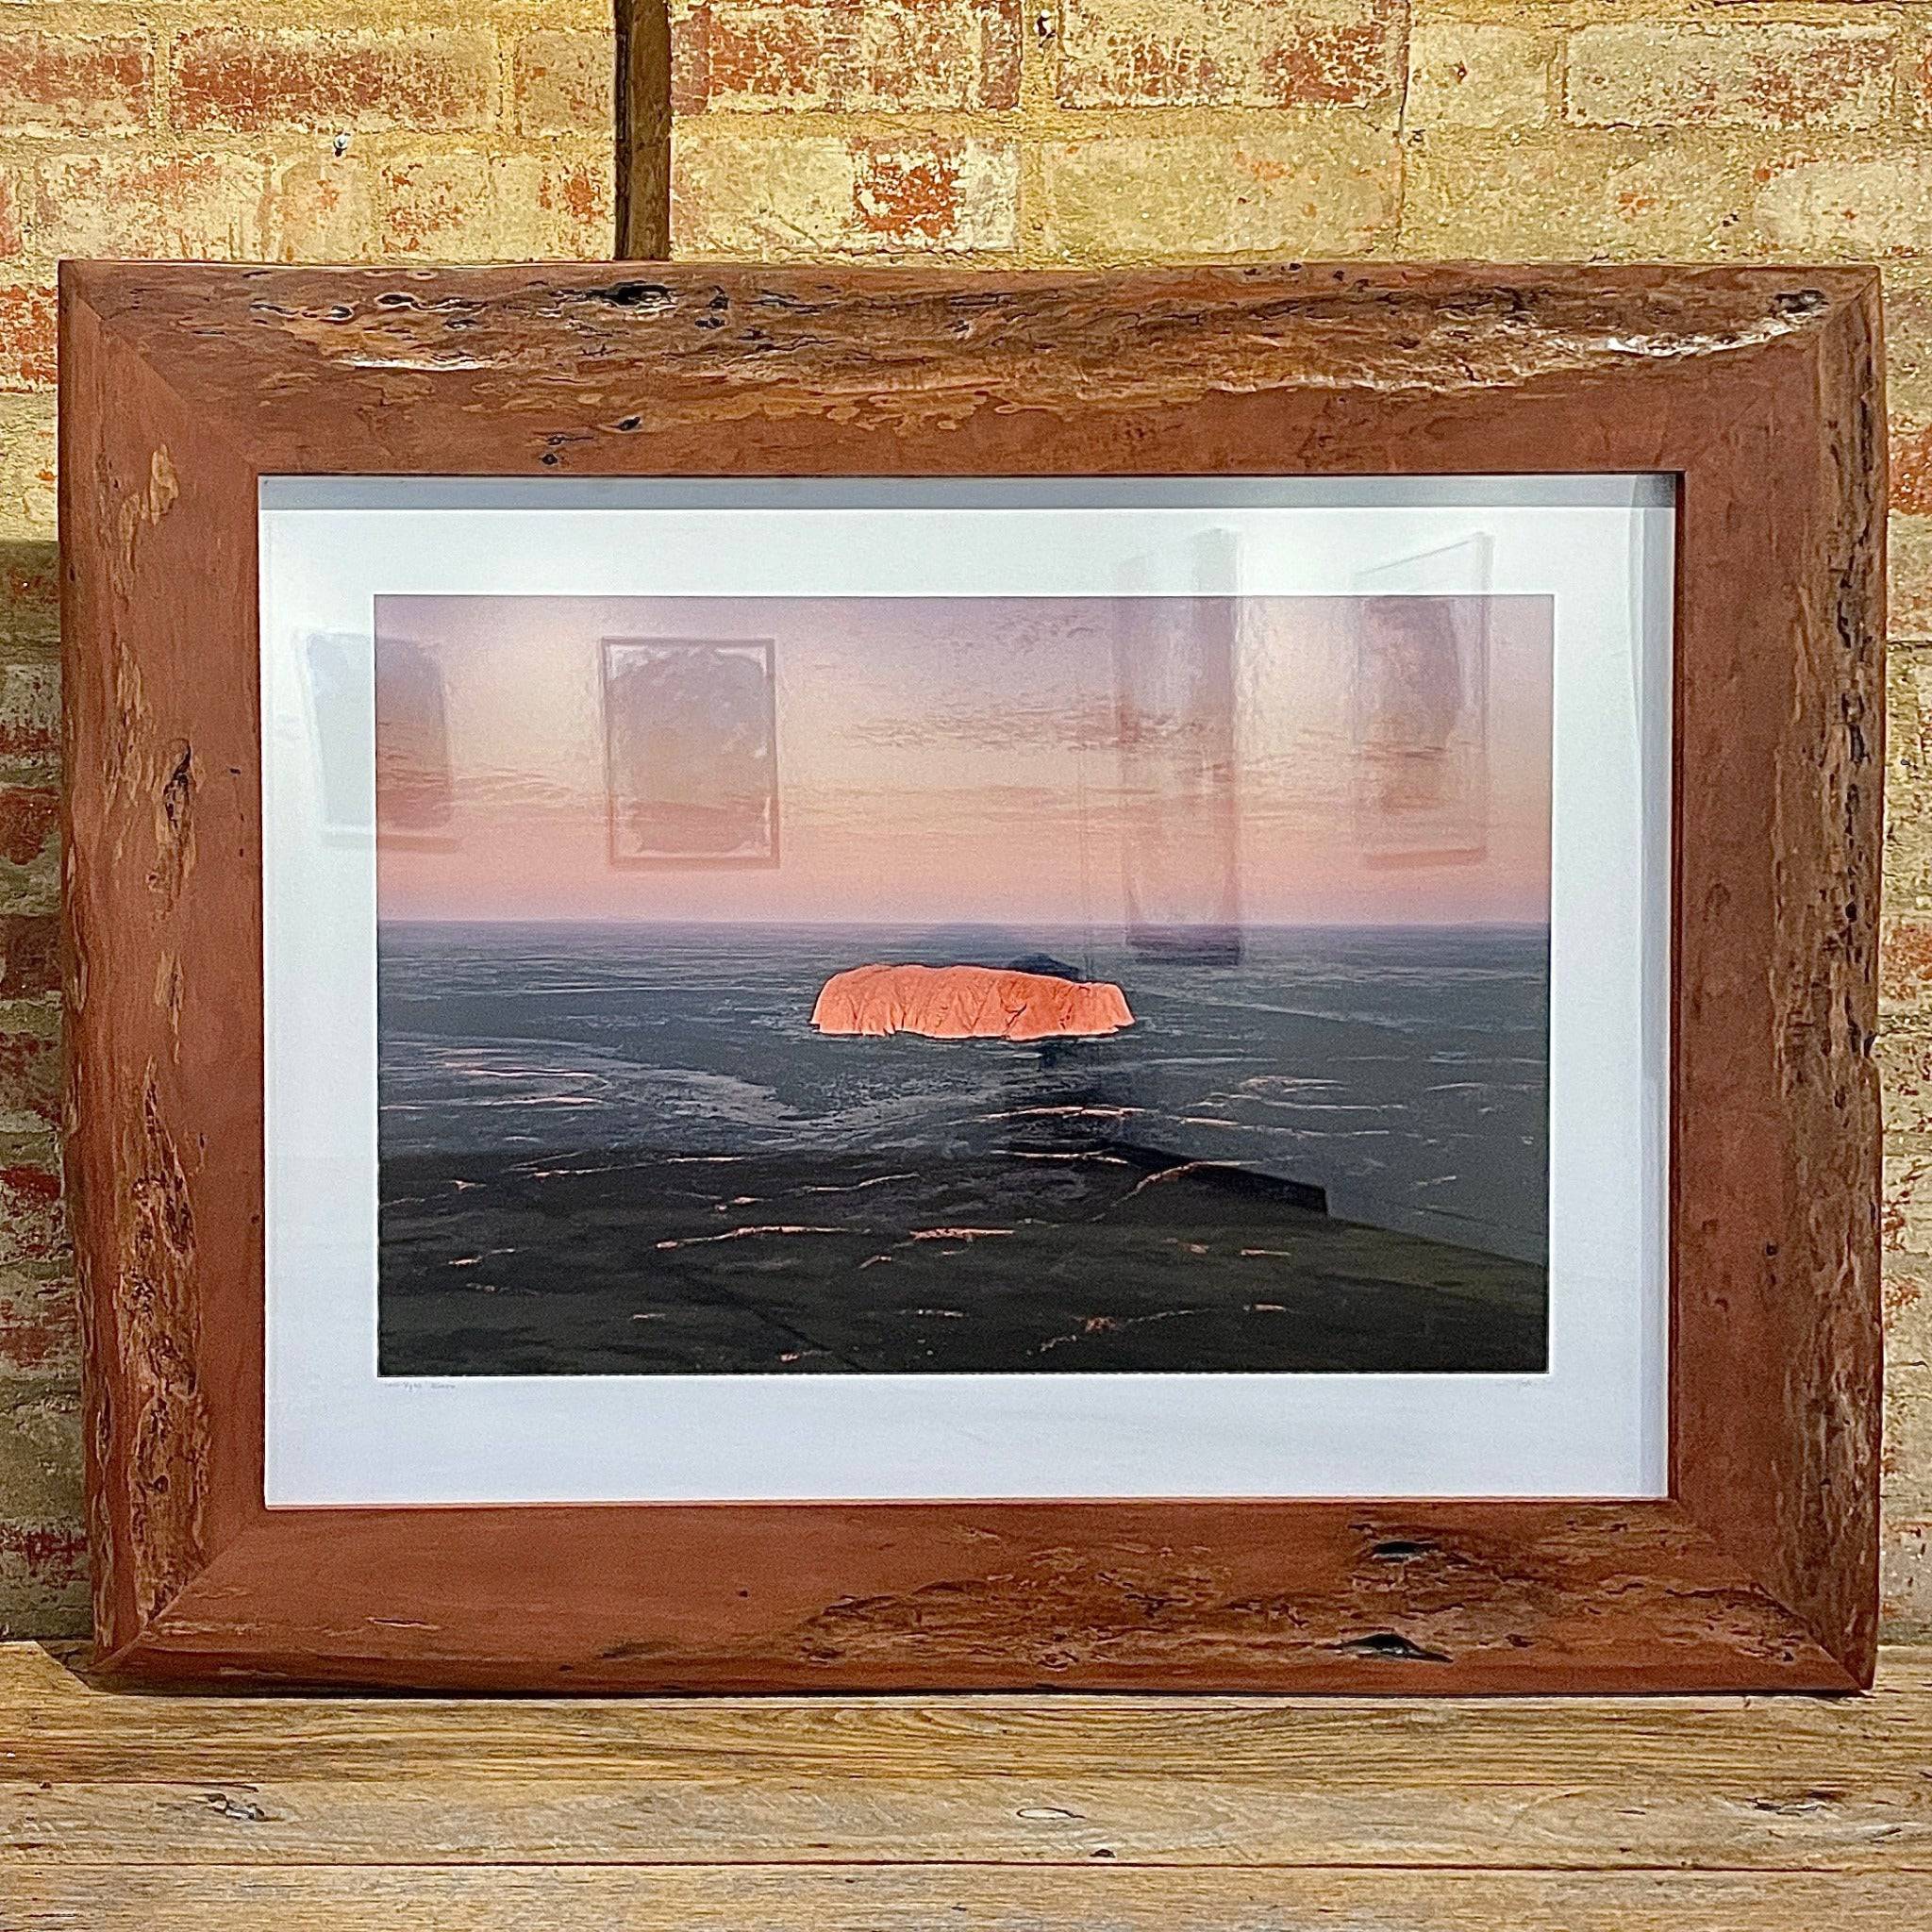 LARGE RIVER RED GUM CUSTOMER PHOTO FRAME WITH A WHITE BORDER AROUND AN IMAGE OF AYERS ROCK